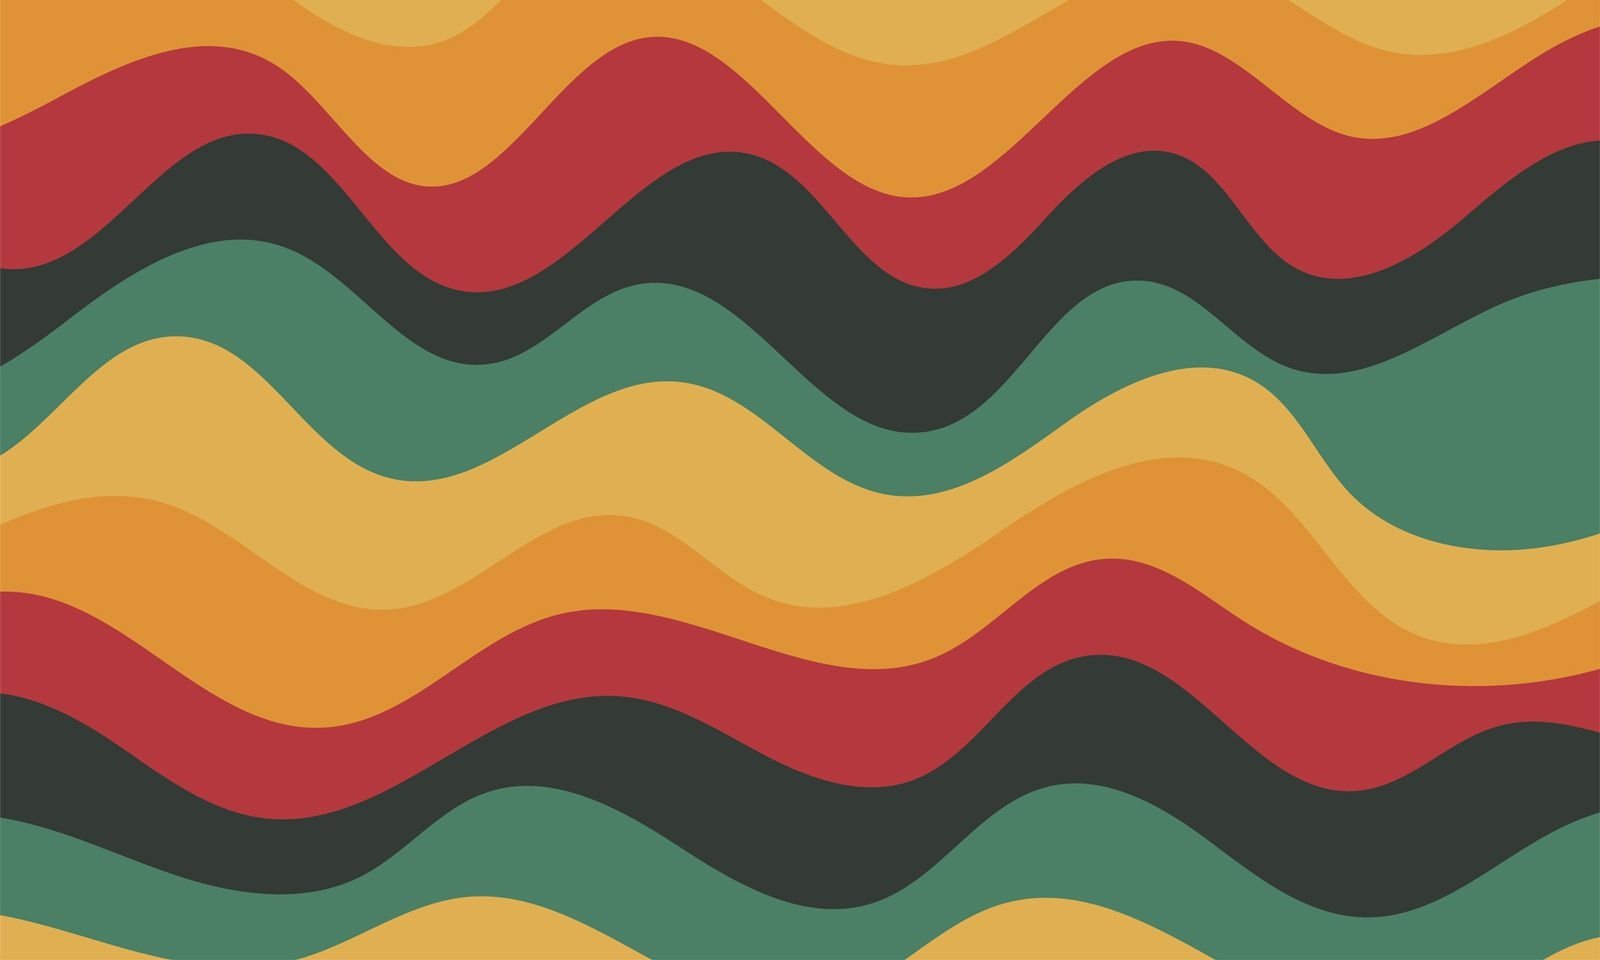 Background with colorful wiggly lines going from left to right of red, black, light yellow, dark yellow, and green